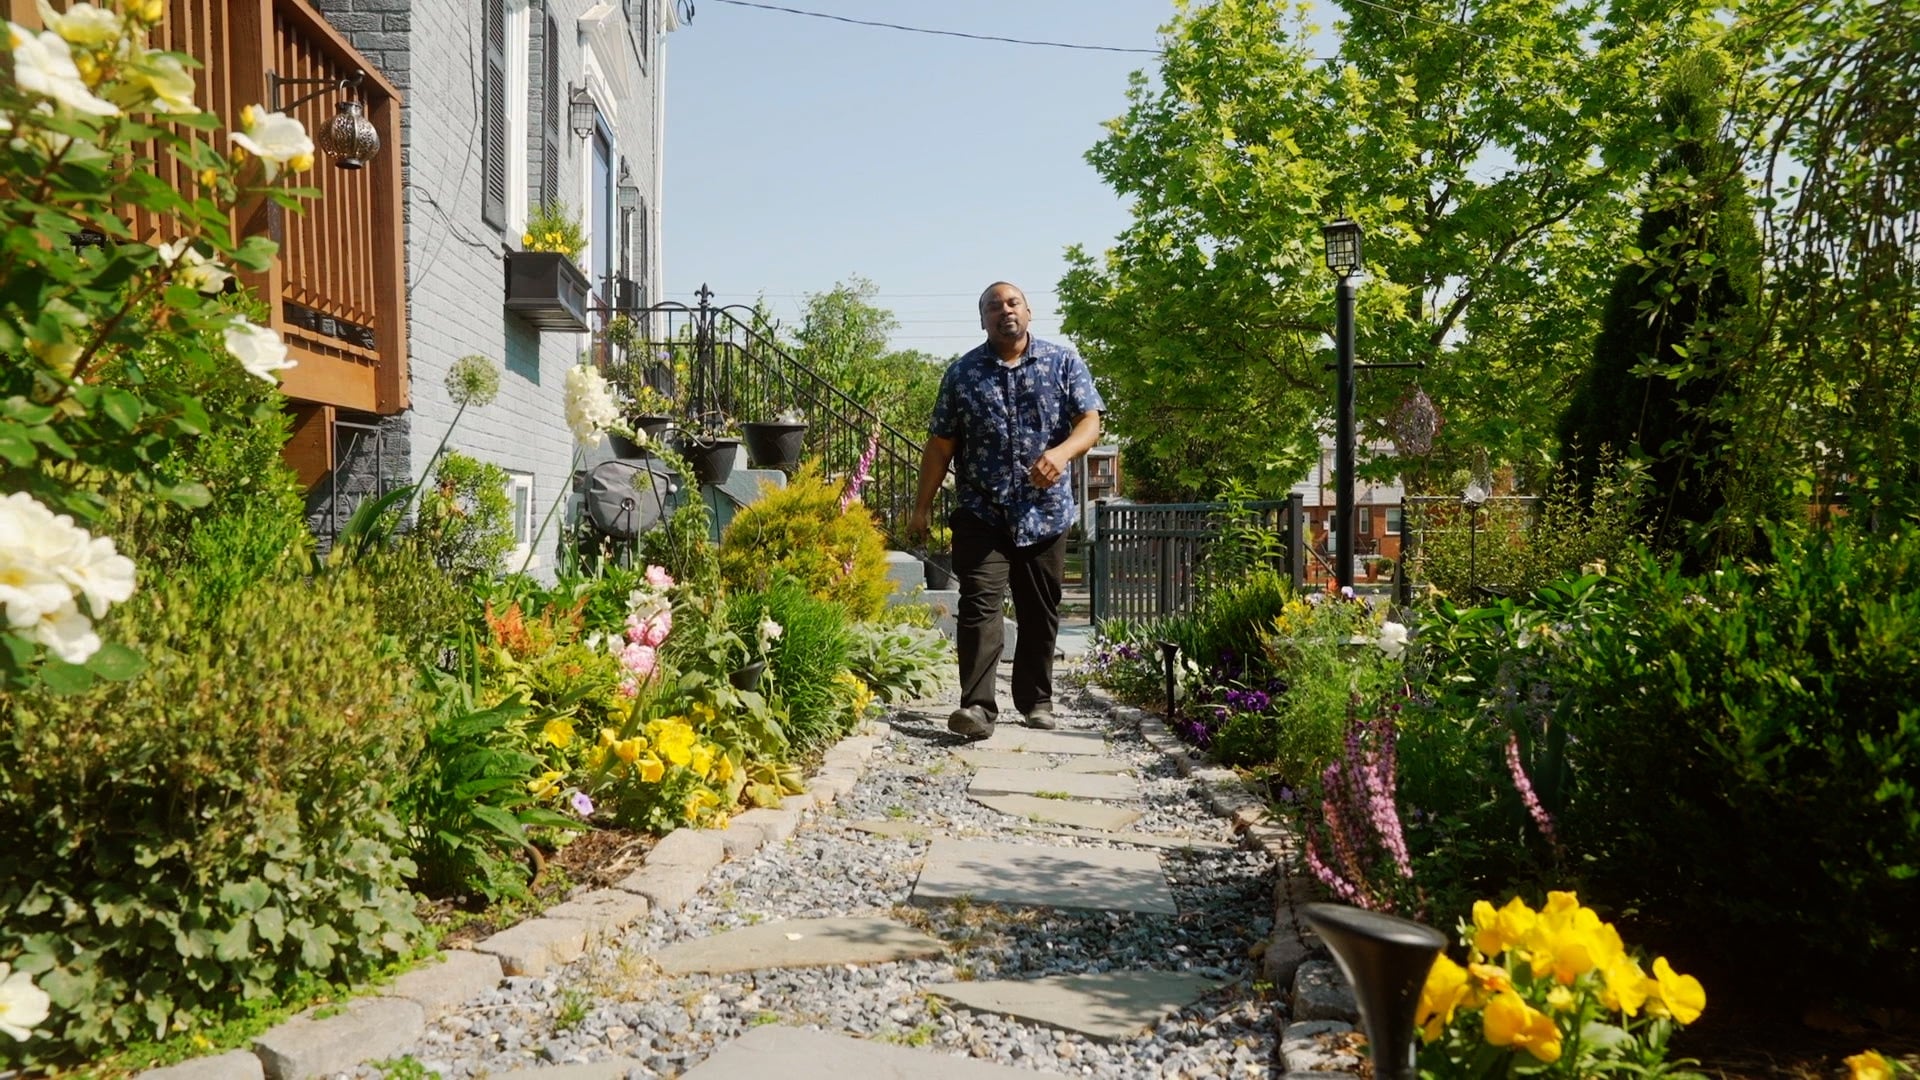 A person walking through a garden of flowers, shrubs, and other various plants